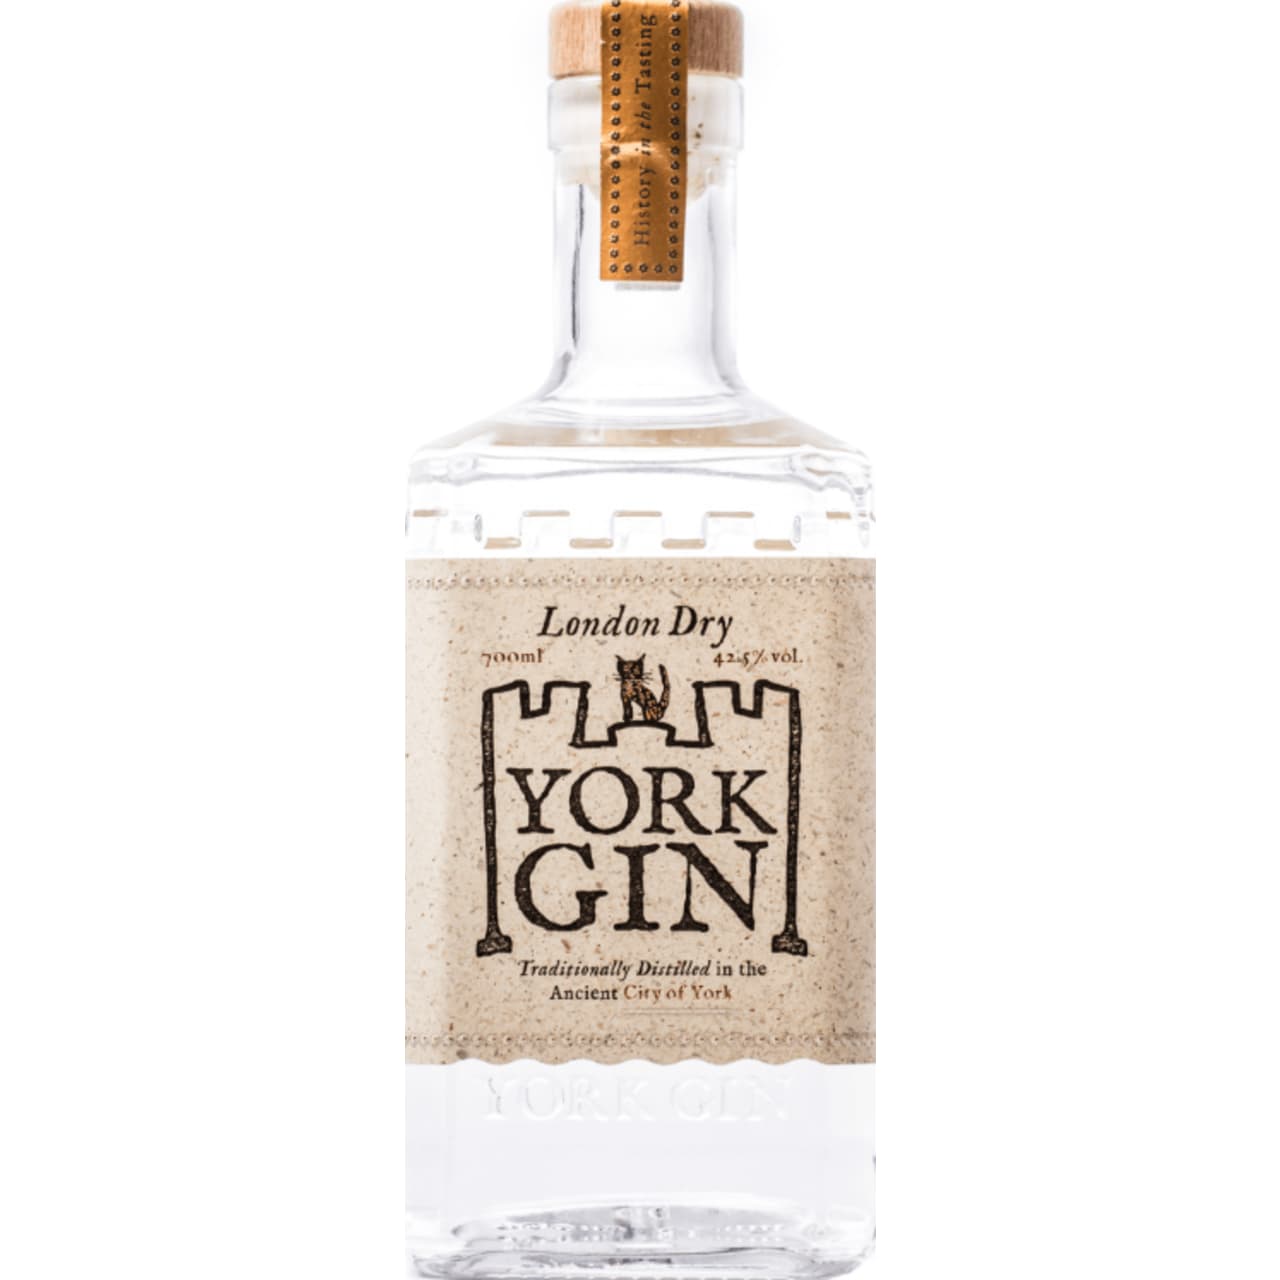 York Gin London Dry is all about the perfect balancing of flavours - a smooth, rounded, go-to gin.